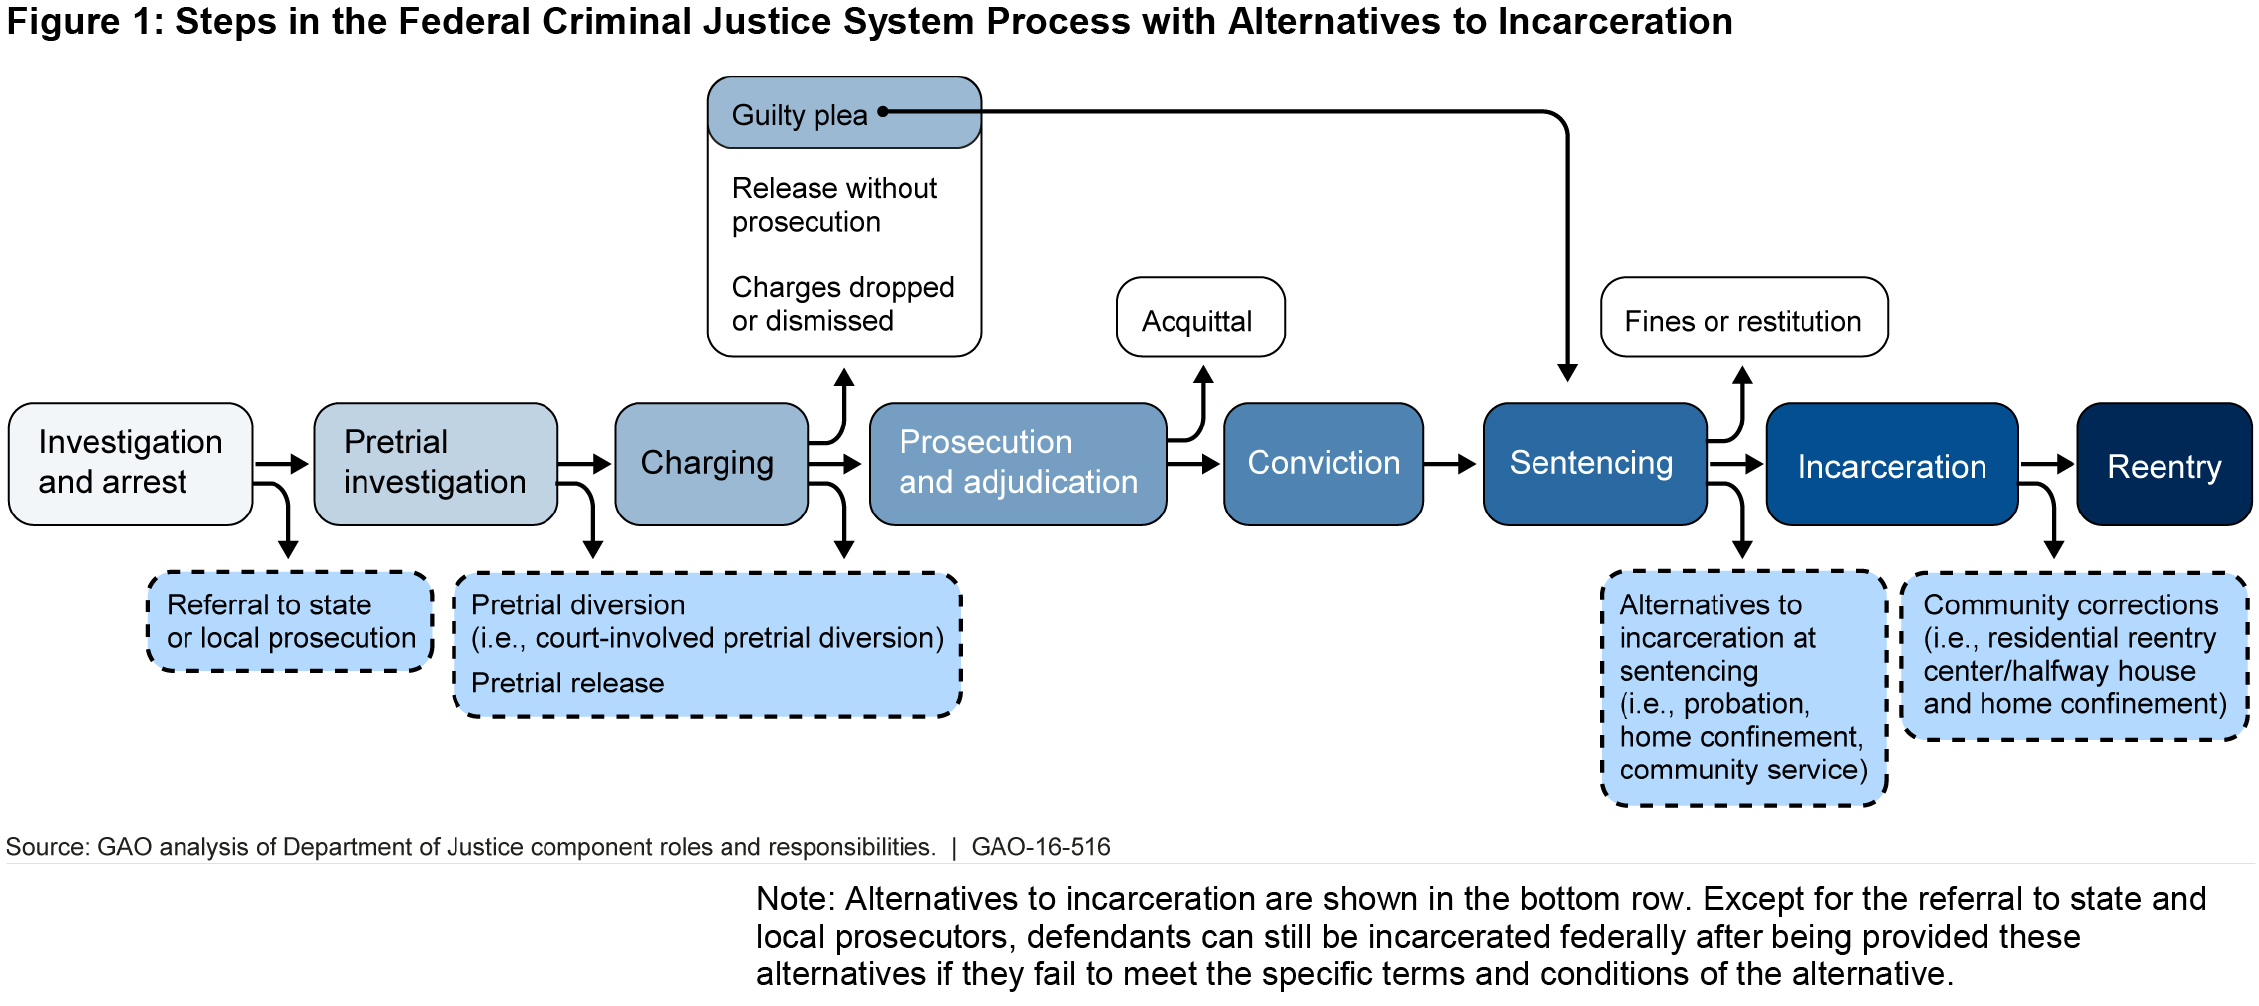 Justice system. Criminal Justice System. Criminal Justice process in the USA. Alternatives to incarceration. Us Criminal Justice System.